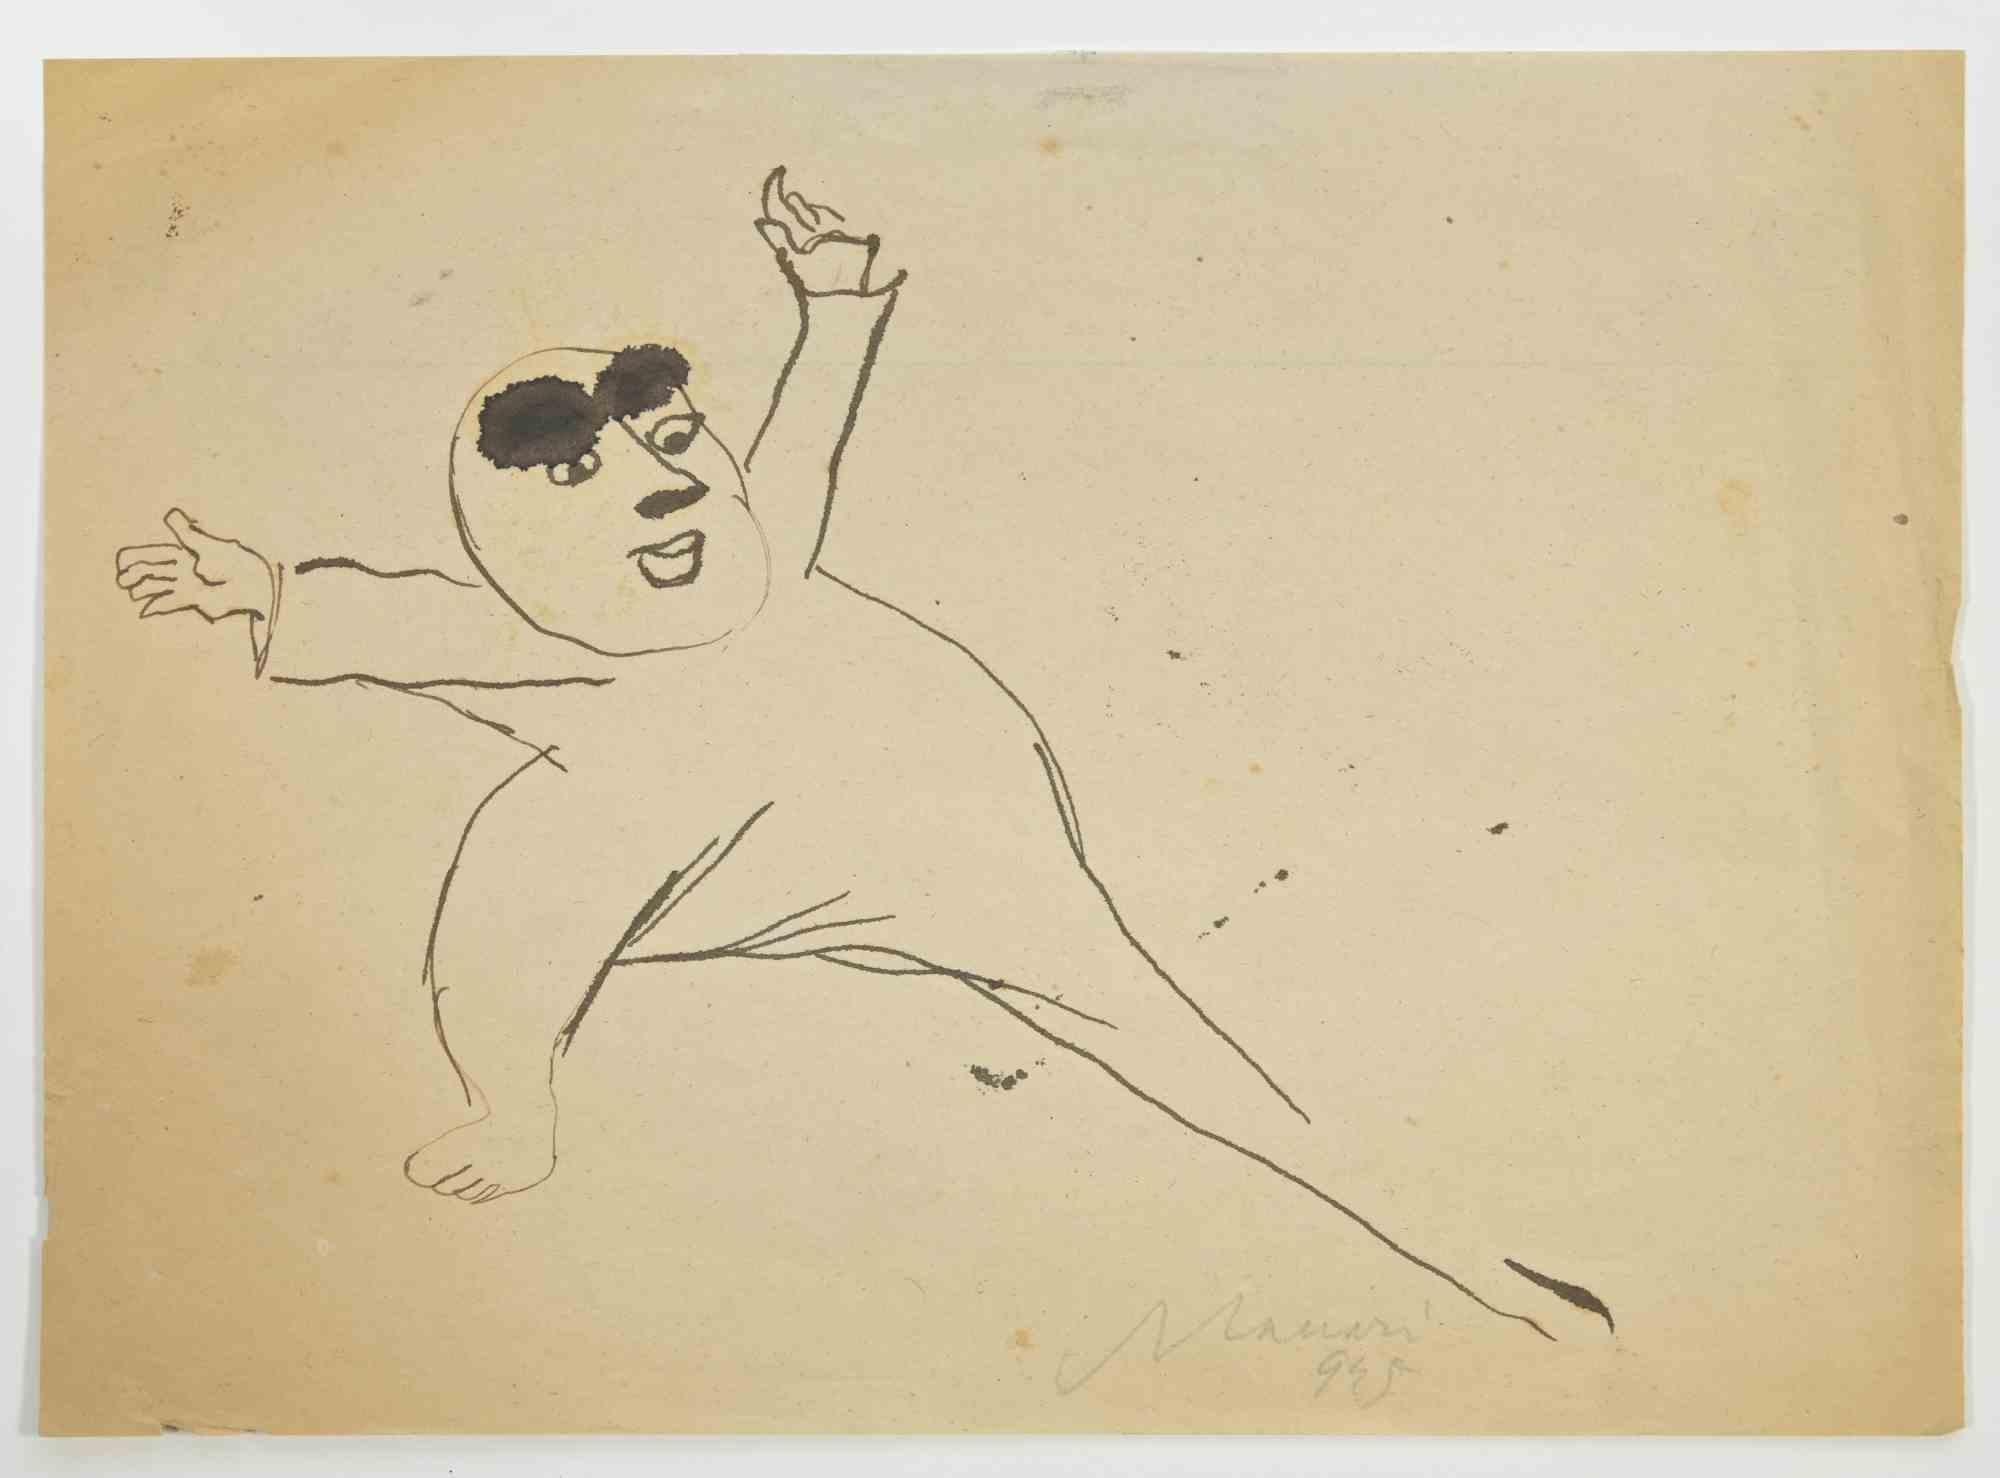 Figure is a watercolor Drawing realized by Mino Maccari  (1924-1989) in 1945.

Hand-signed on the lower, with another drawing on the rear.

Good conditions.

Mino Maccari (Siena, 1924-Rome, June 16, 1989) was an Italian writer, painter, engraver and